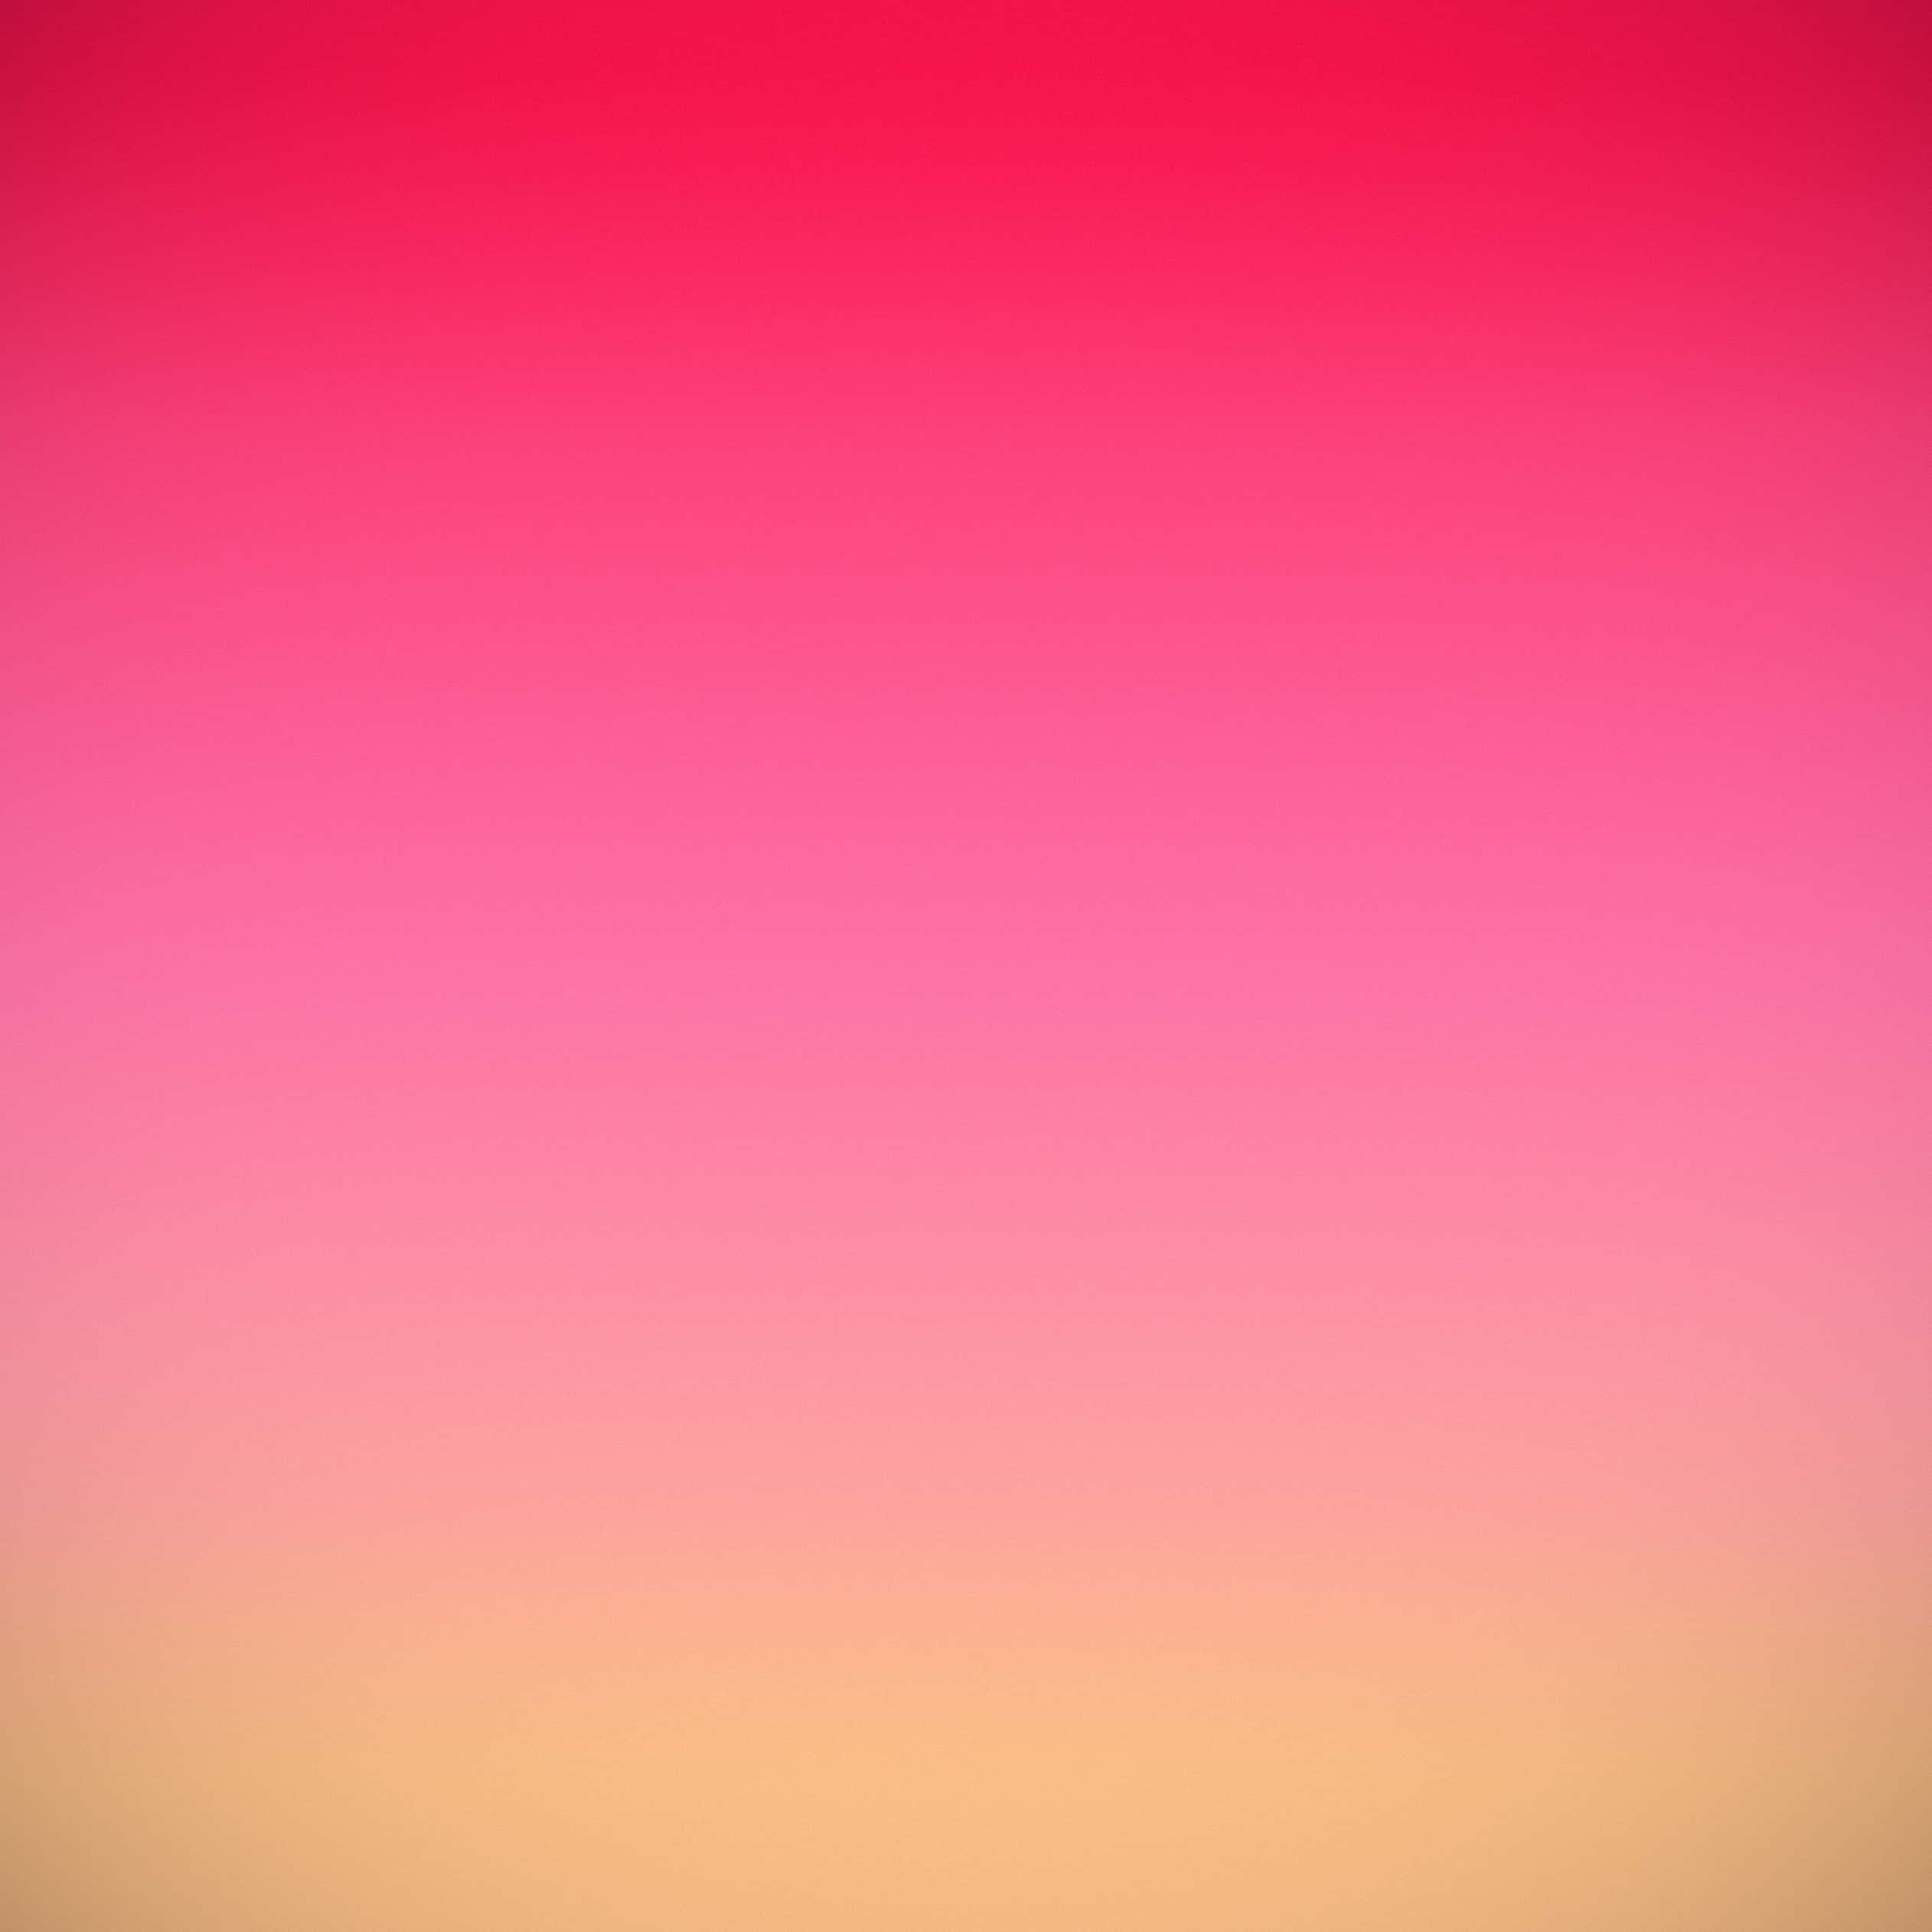 A Pink And Yellow Gradient Background Wallpaper